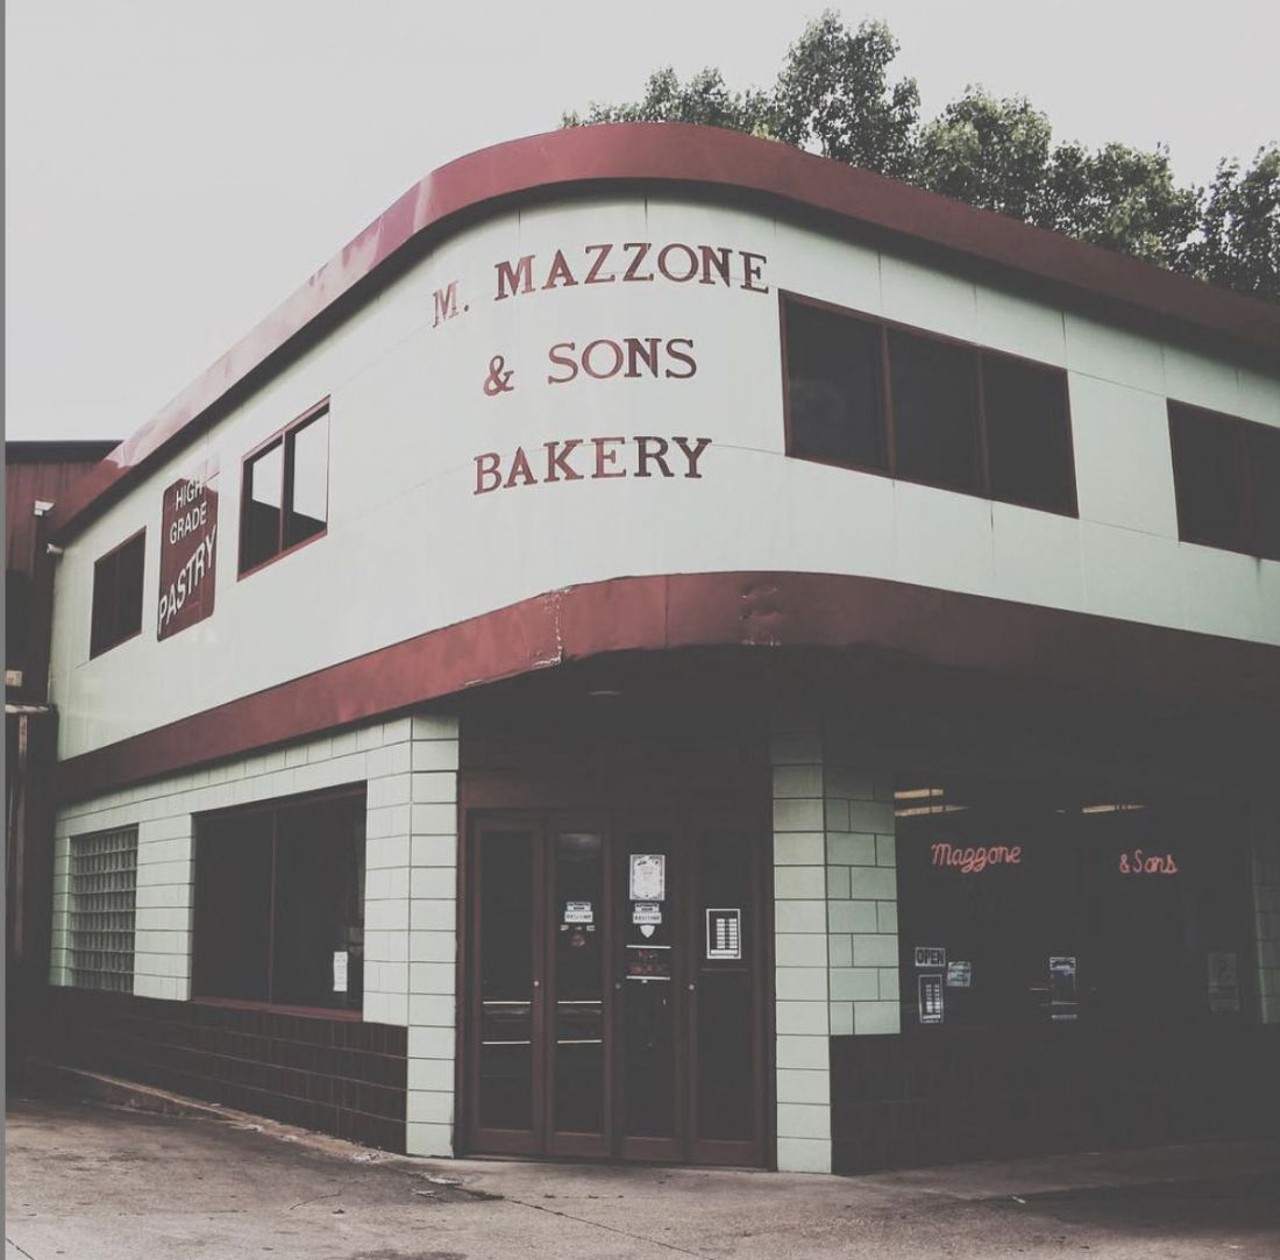  Mazzone and Sons Bakery
3519 Clark Ave., Cleveland
Talk about old school, this west side bakery goes back to 1937. This bakery is known for their unique pizza as well as their Italian baked goods.
Photo via @Nonoimlolo/Instagram